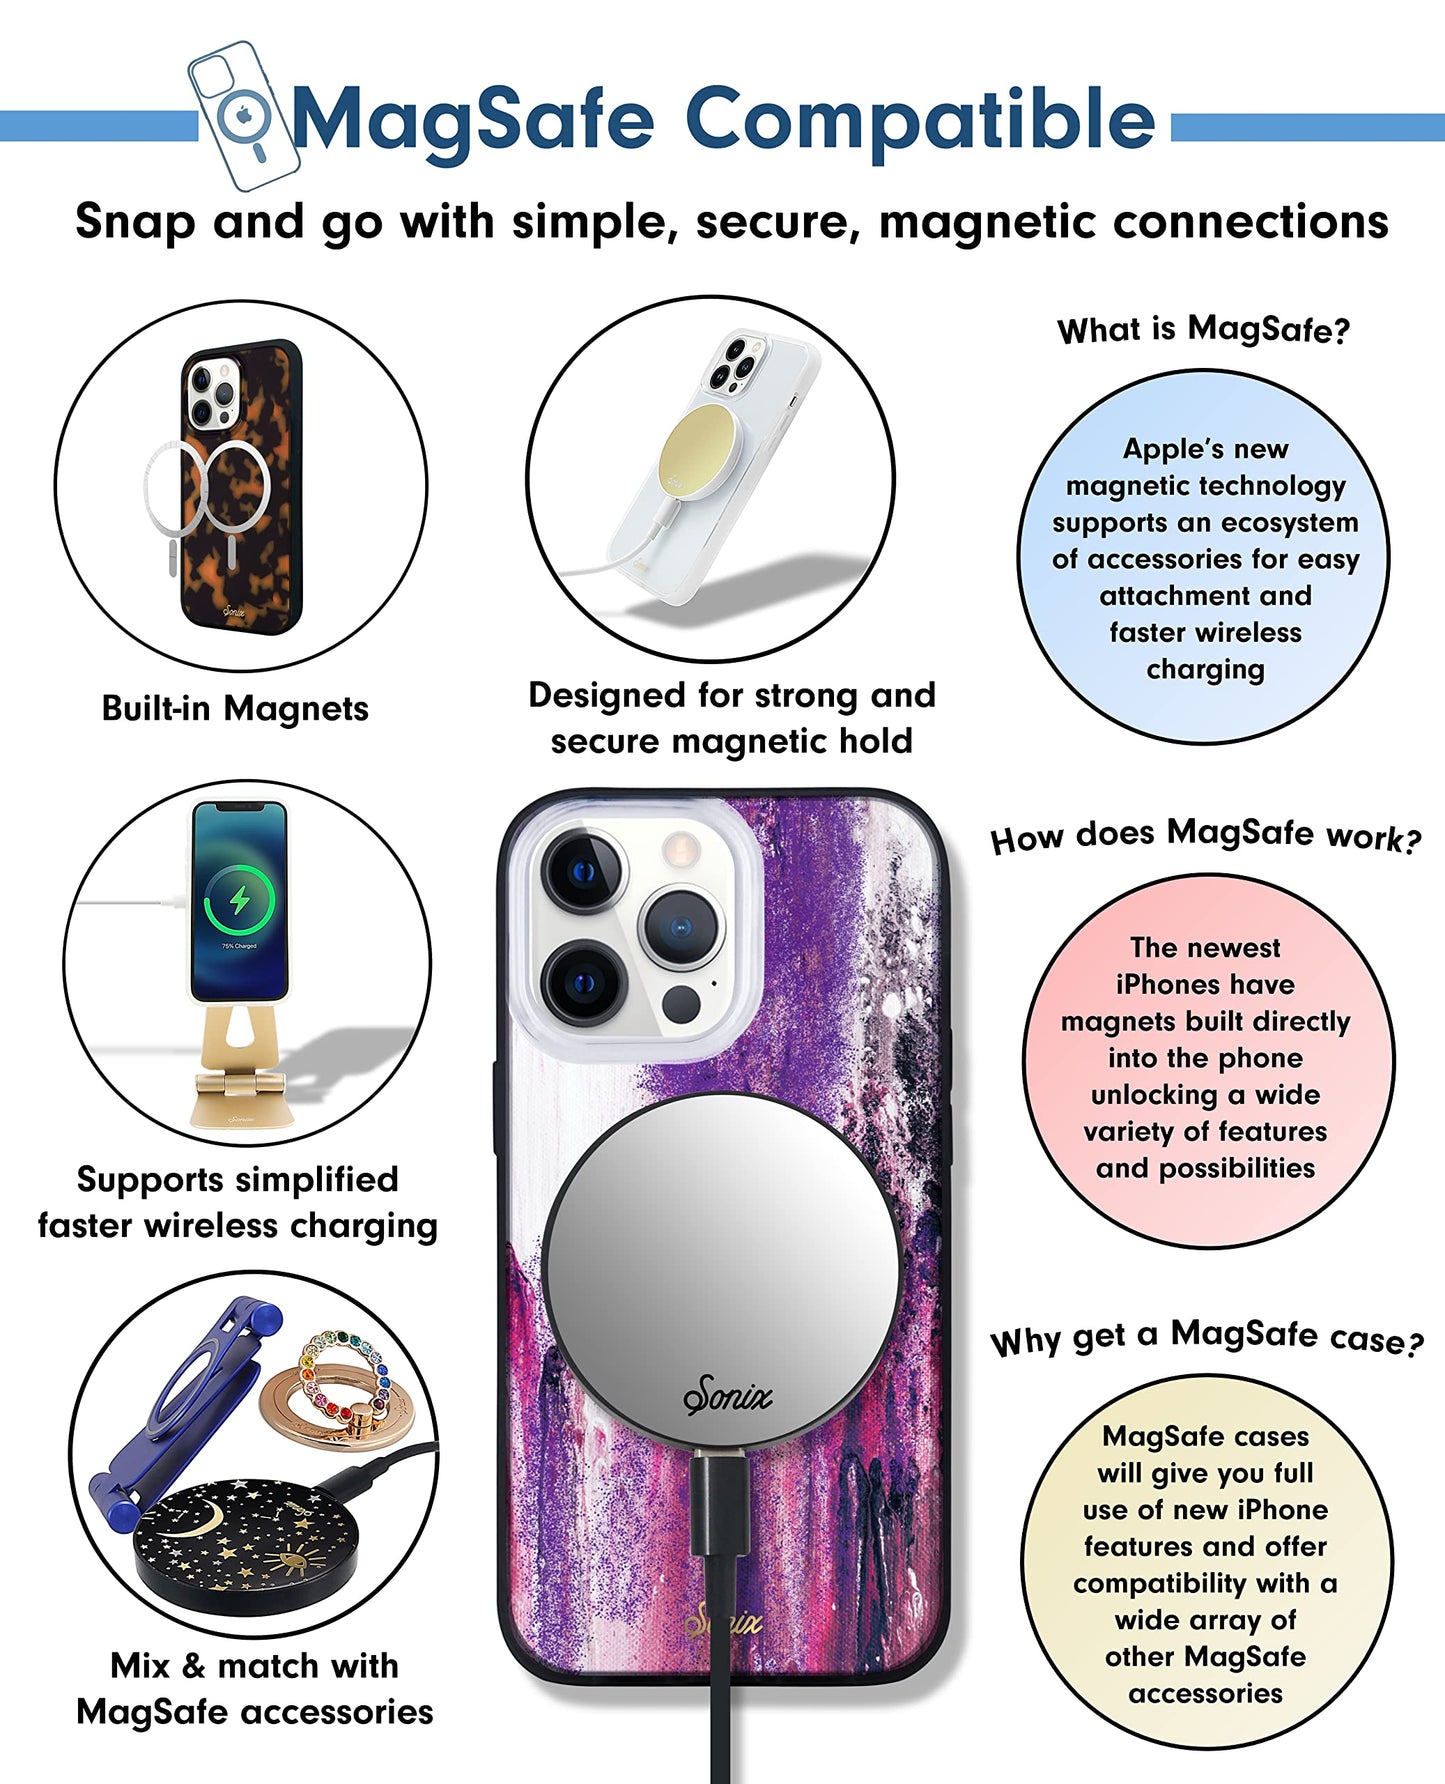 Sonix Phone Case for iPhone 13 Pro Max / 12 Pro Max | Compatible with MagSafe | 10ft Drop Tested | Purple Rain